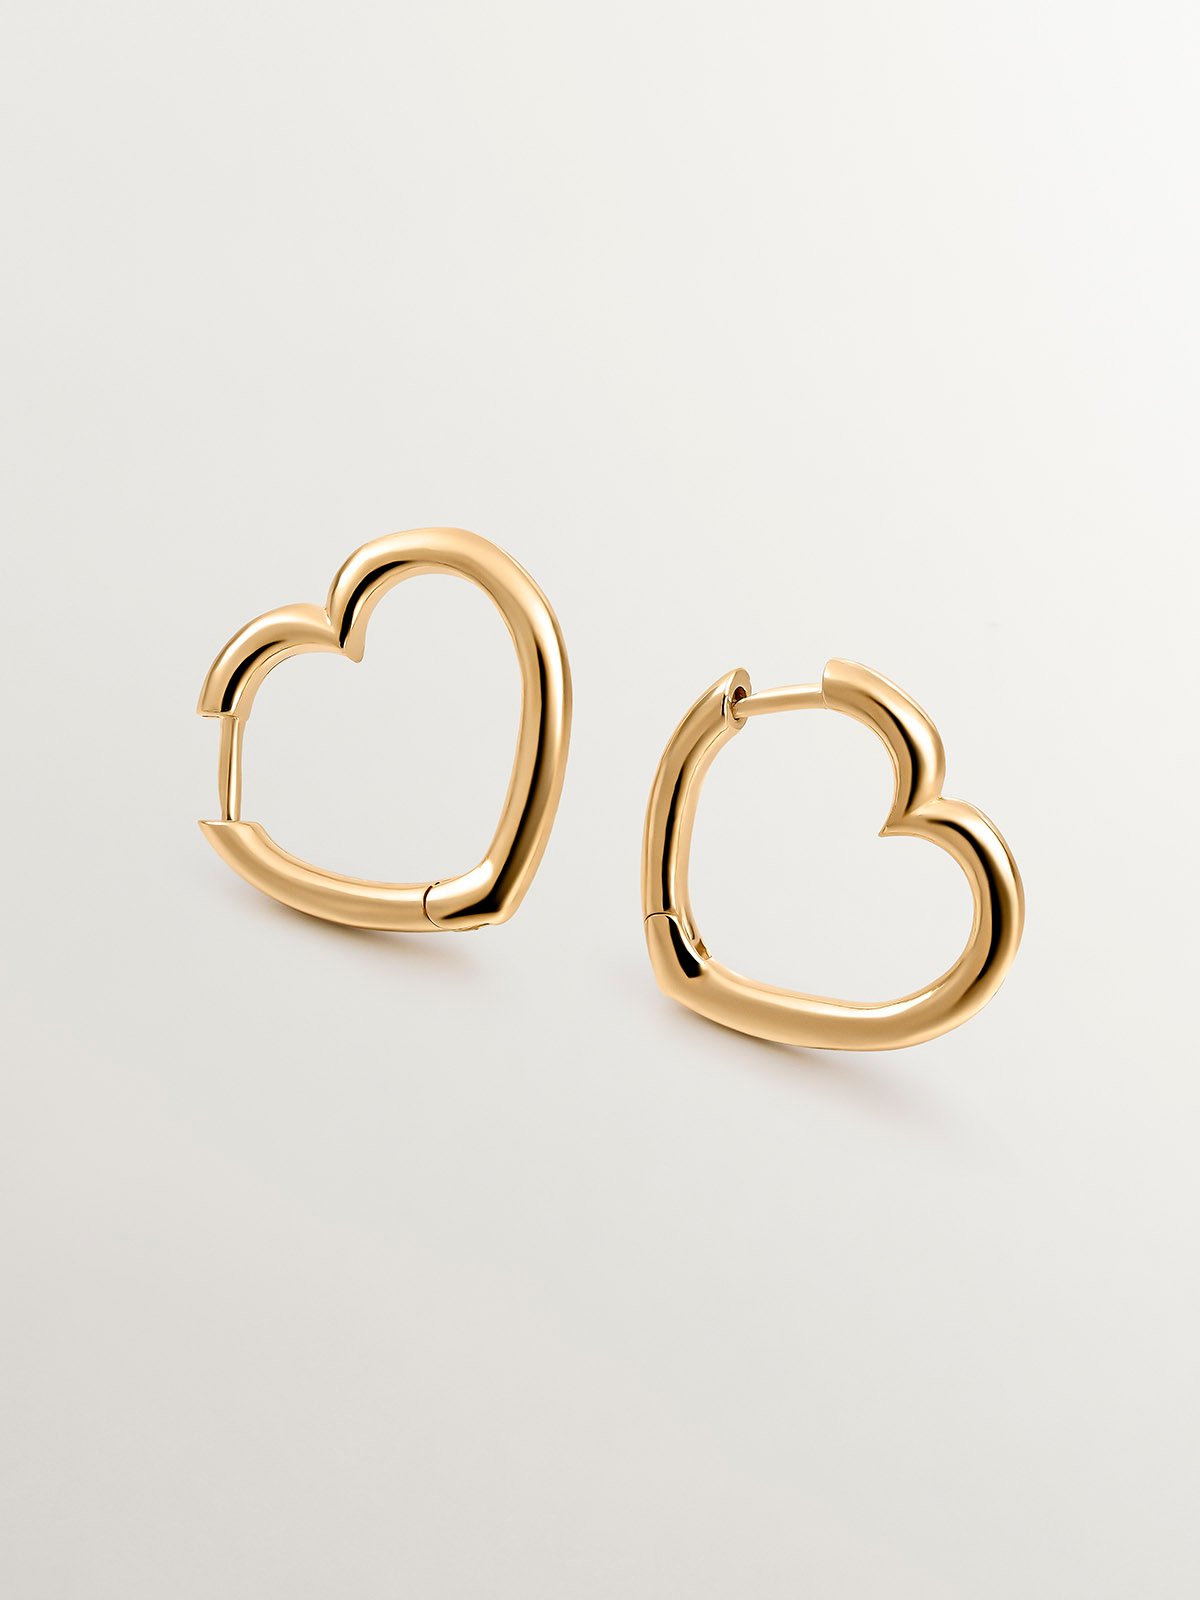 925 Silver hoop earrings gold-plated in 18K yellow gold in the shape of a heart.